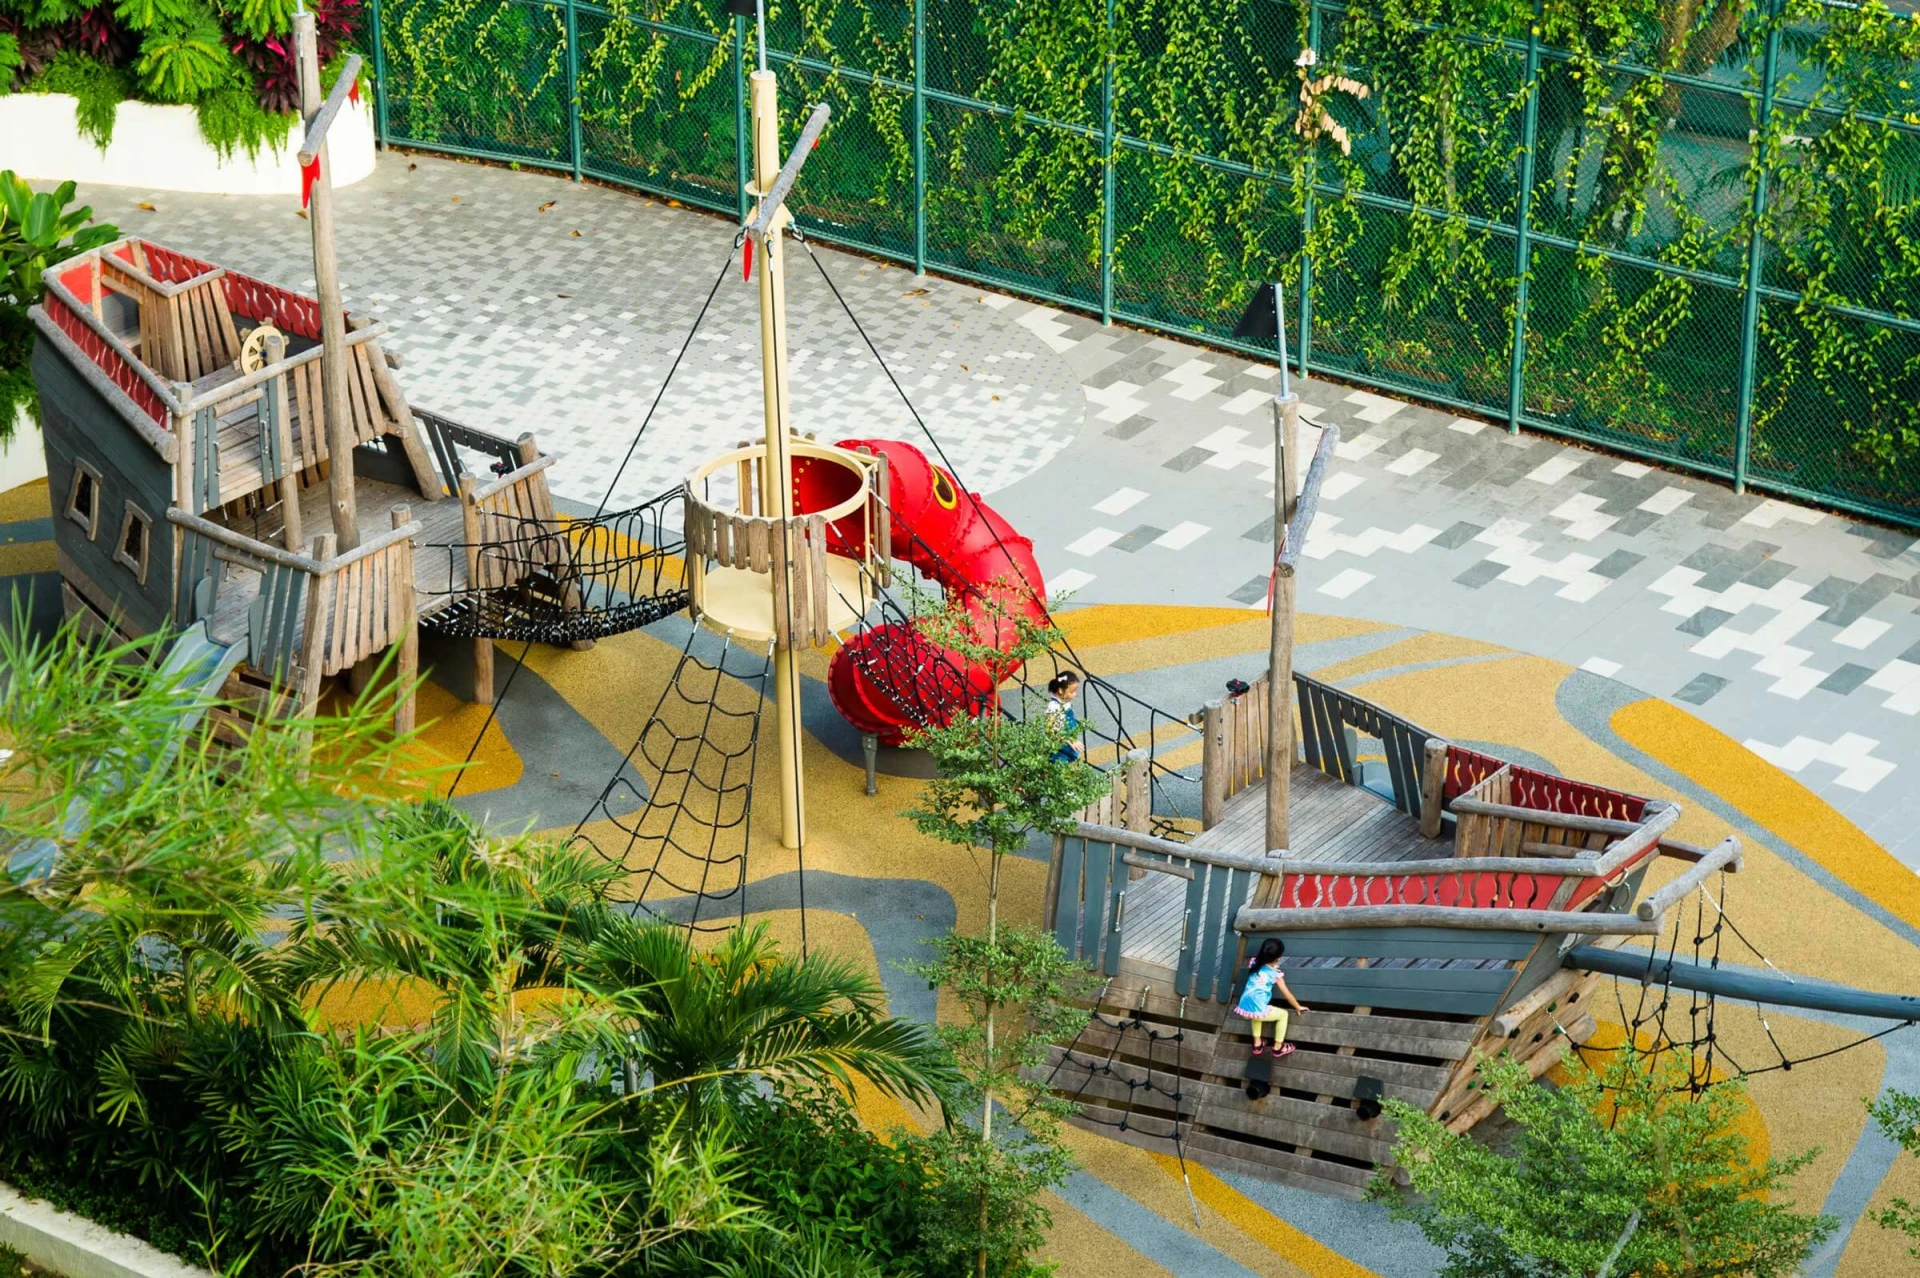 A large wooden playground ship with climbing net and bright red slide. If you want to create truly showstopping play site, make sure your playground construction project has enough budget allocated!